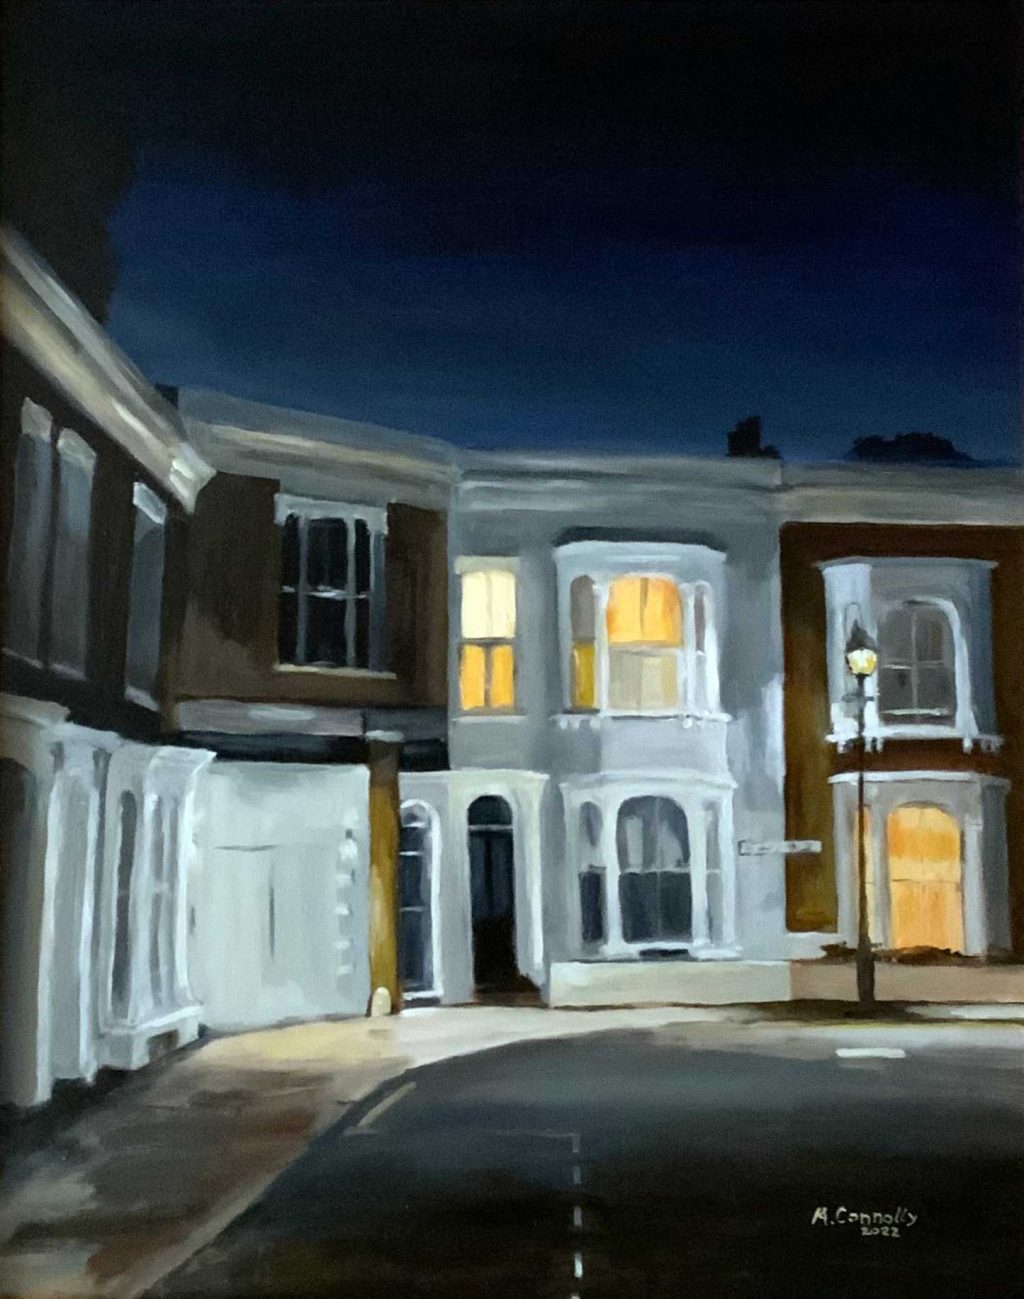 Painting of the nighttime on Lockhart Street, Bow, East London